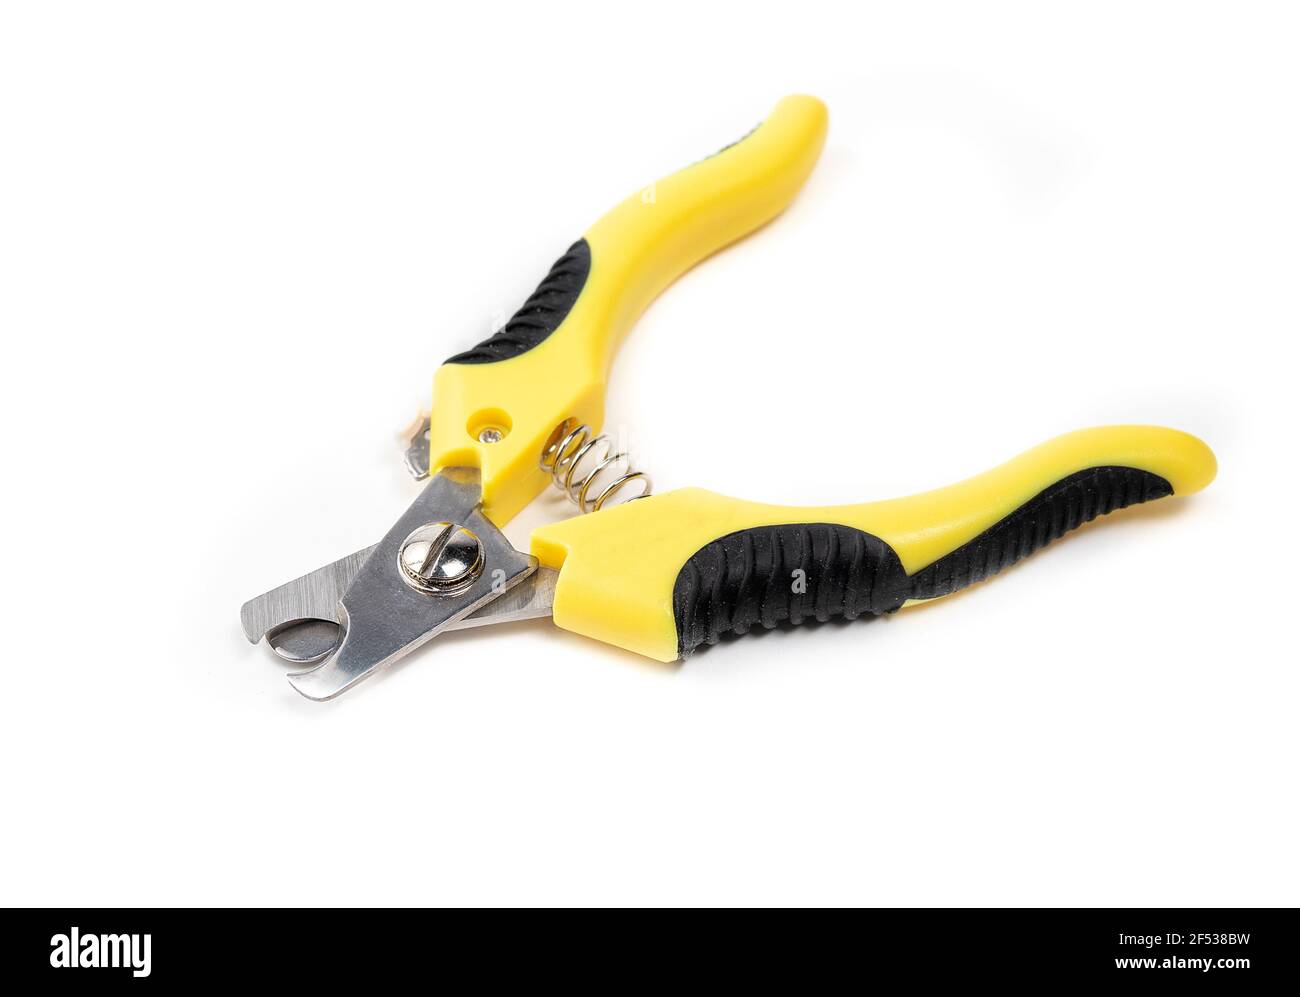 Dog nail trimmer with open blades. Yellow black scissor style clipper with two stainless steel blades. Used by groomers and pet owners to keep dog cla Stock Photo